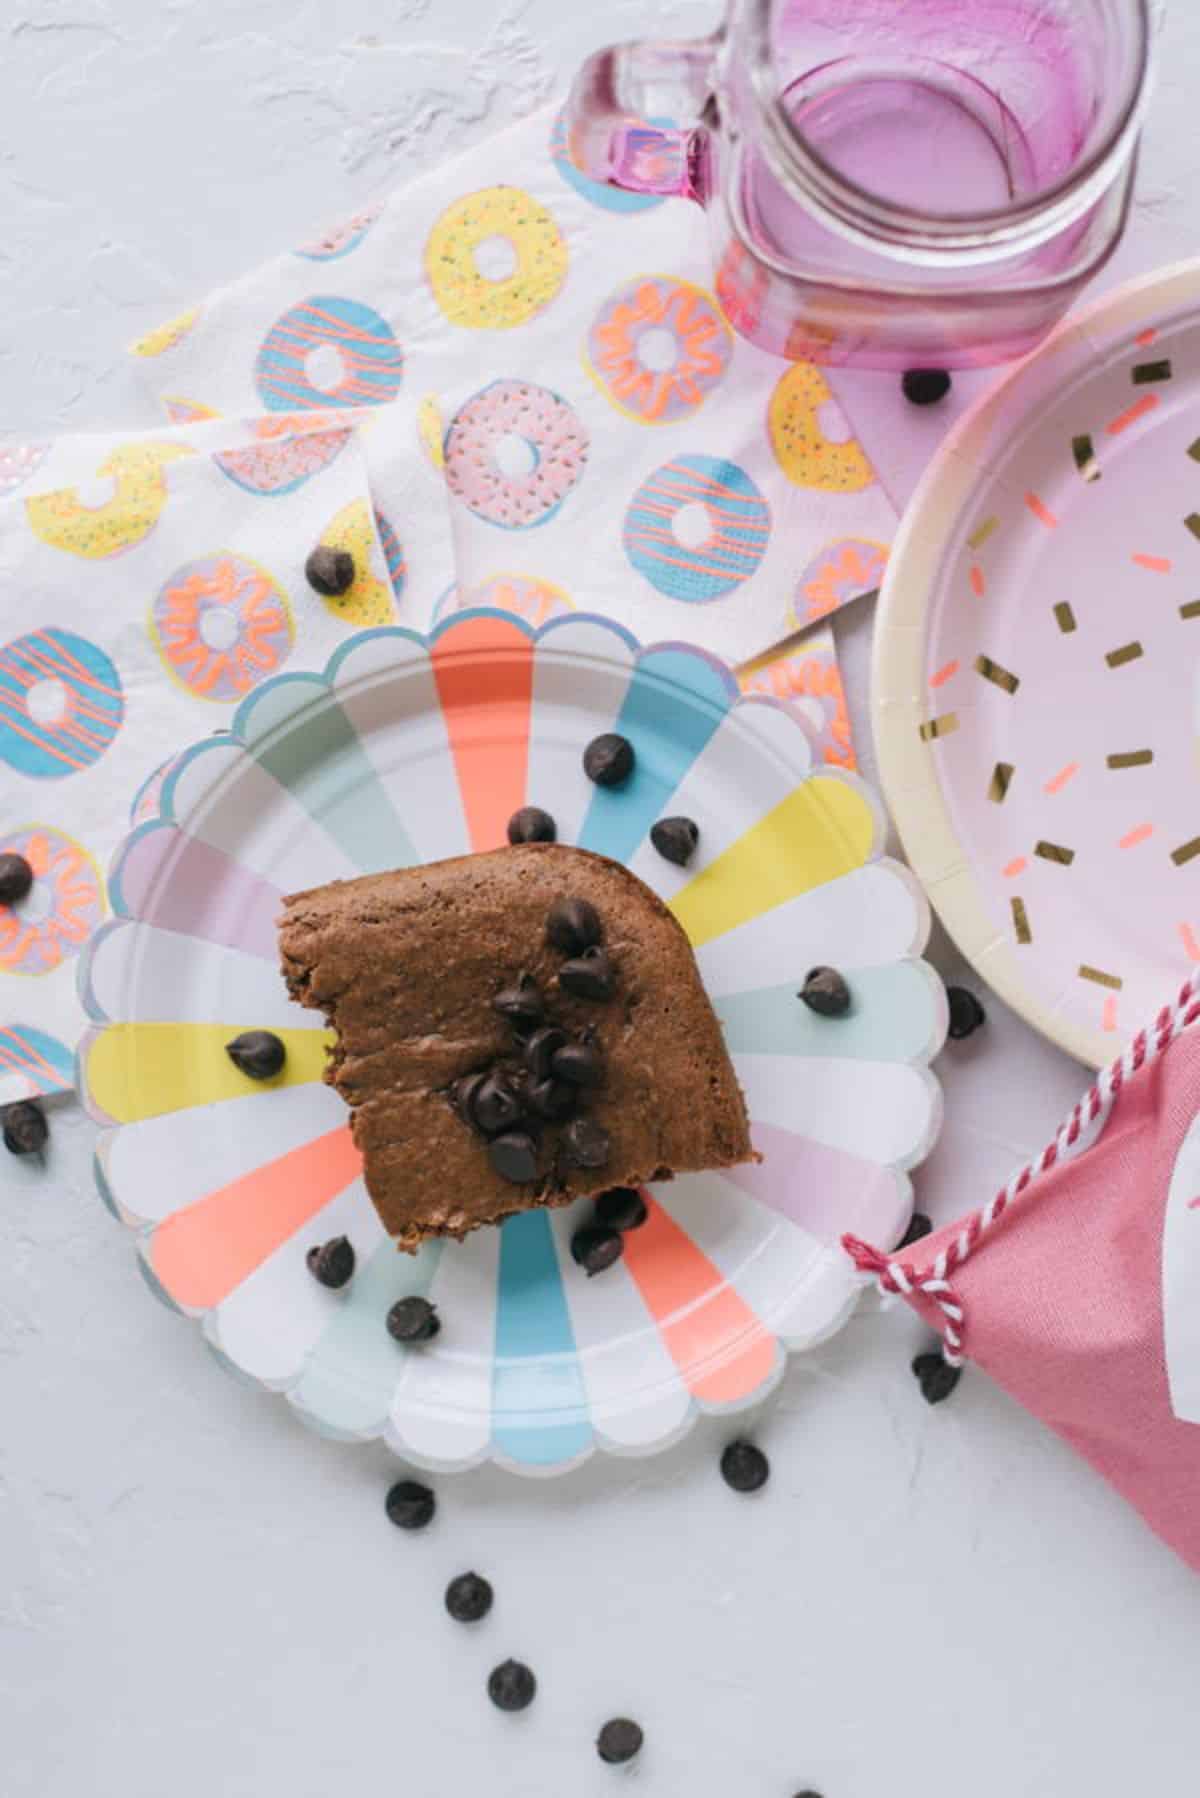 A piece of chocolate pudding dump cake on a colofrful plate.